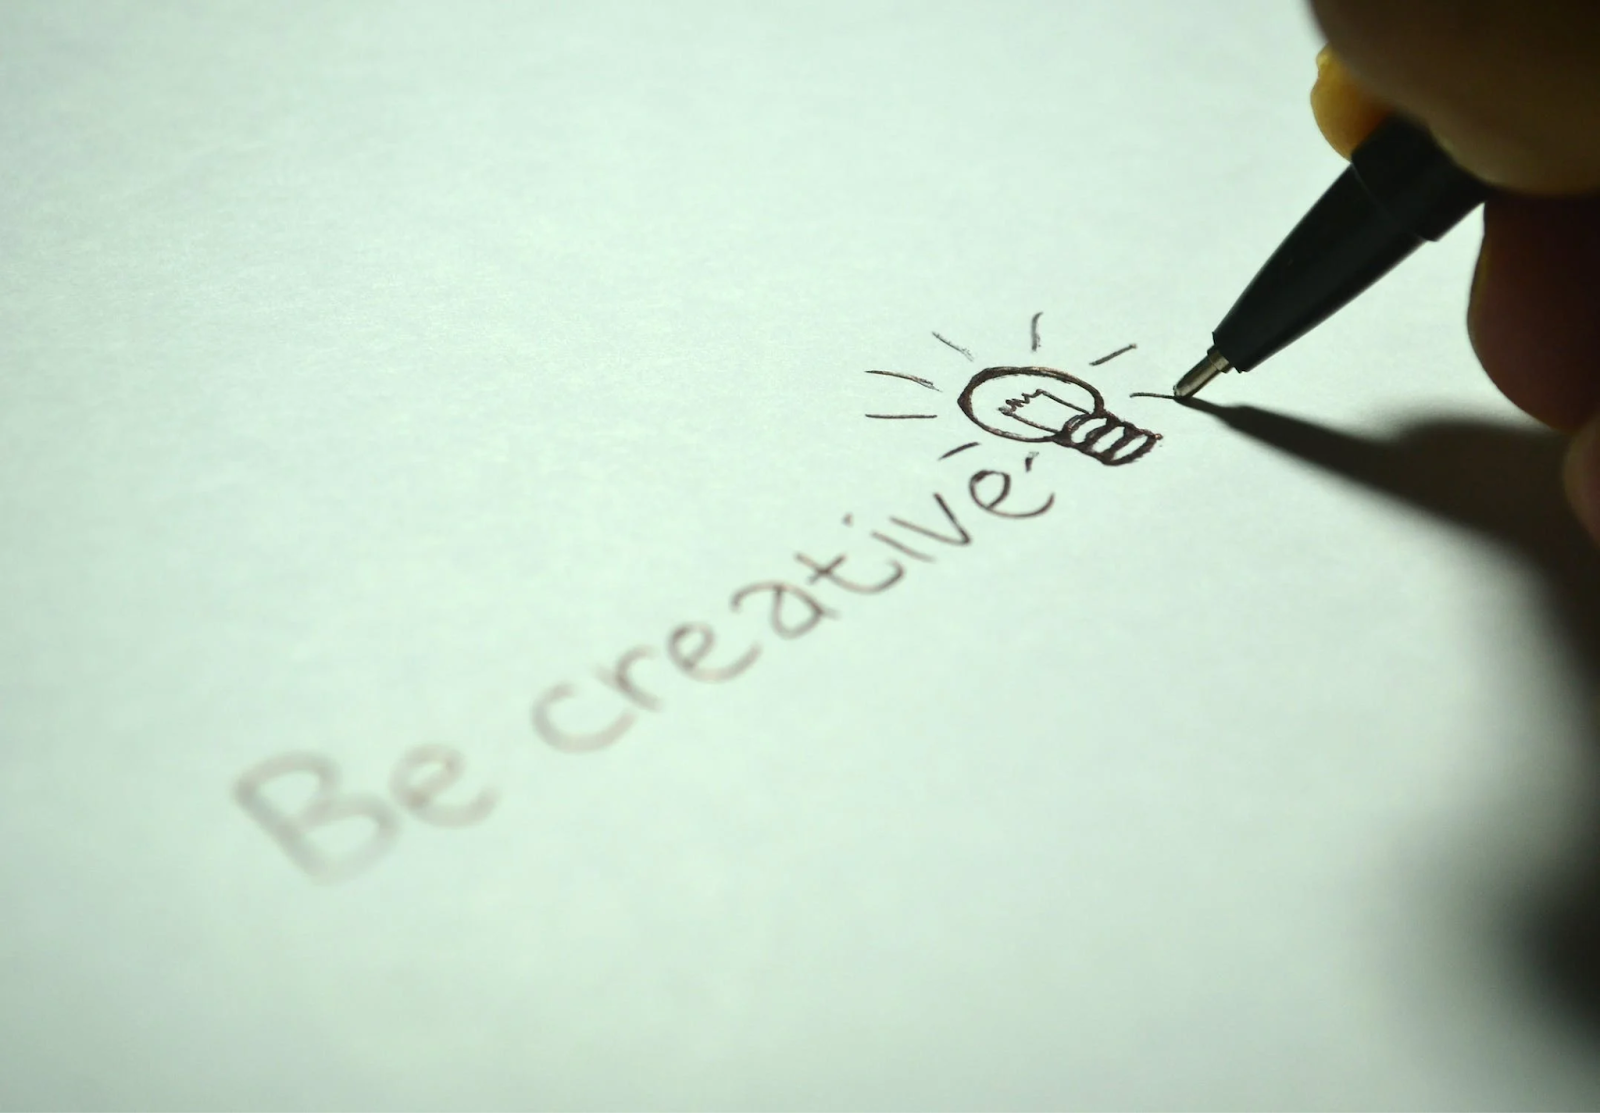 a ball point pen writing the phrase "Be Creative" with blank in